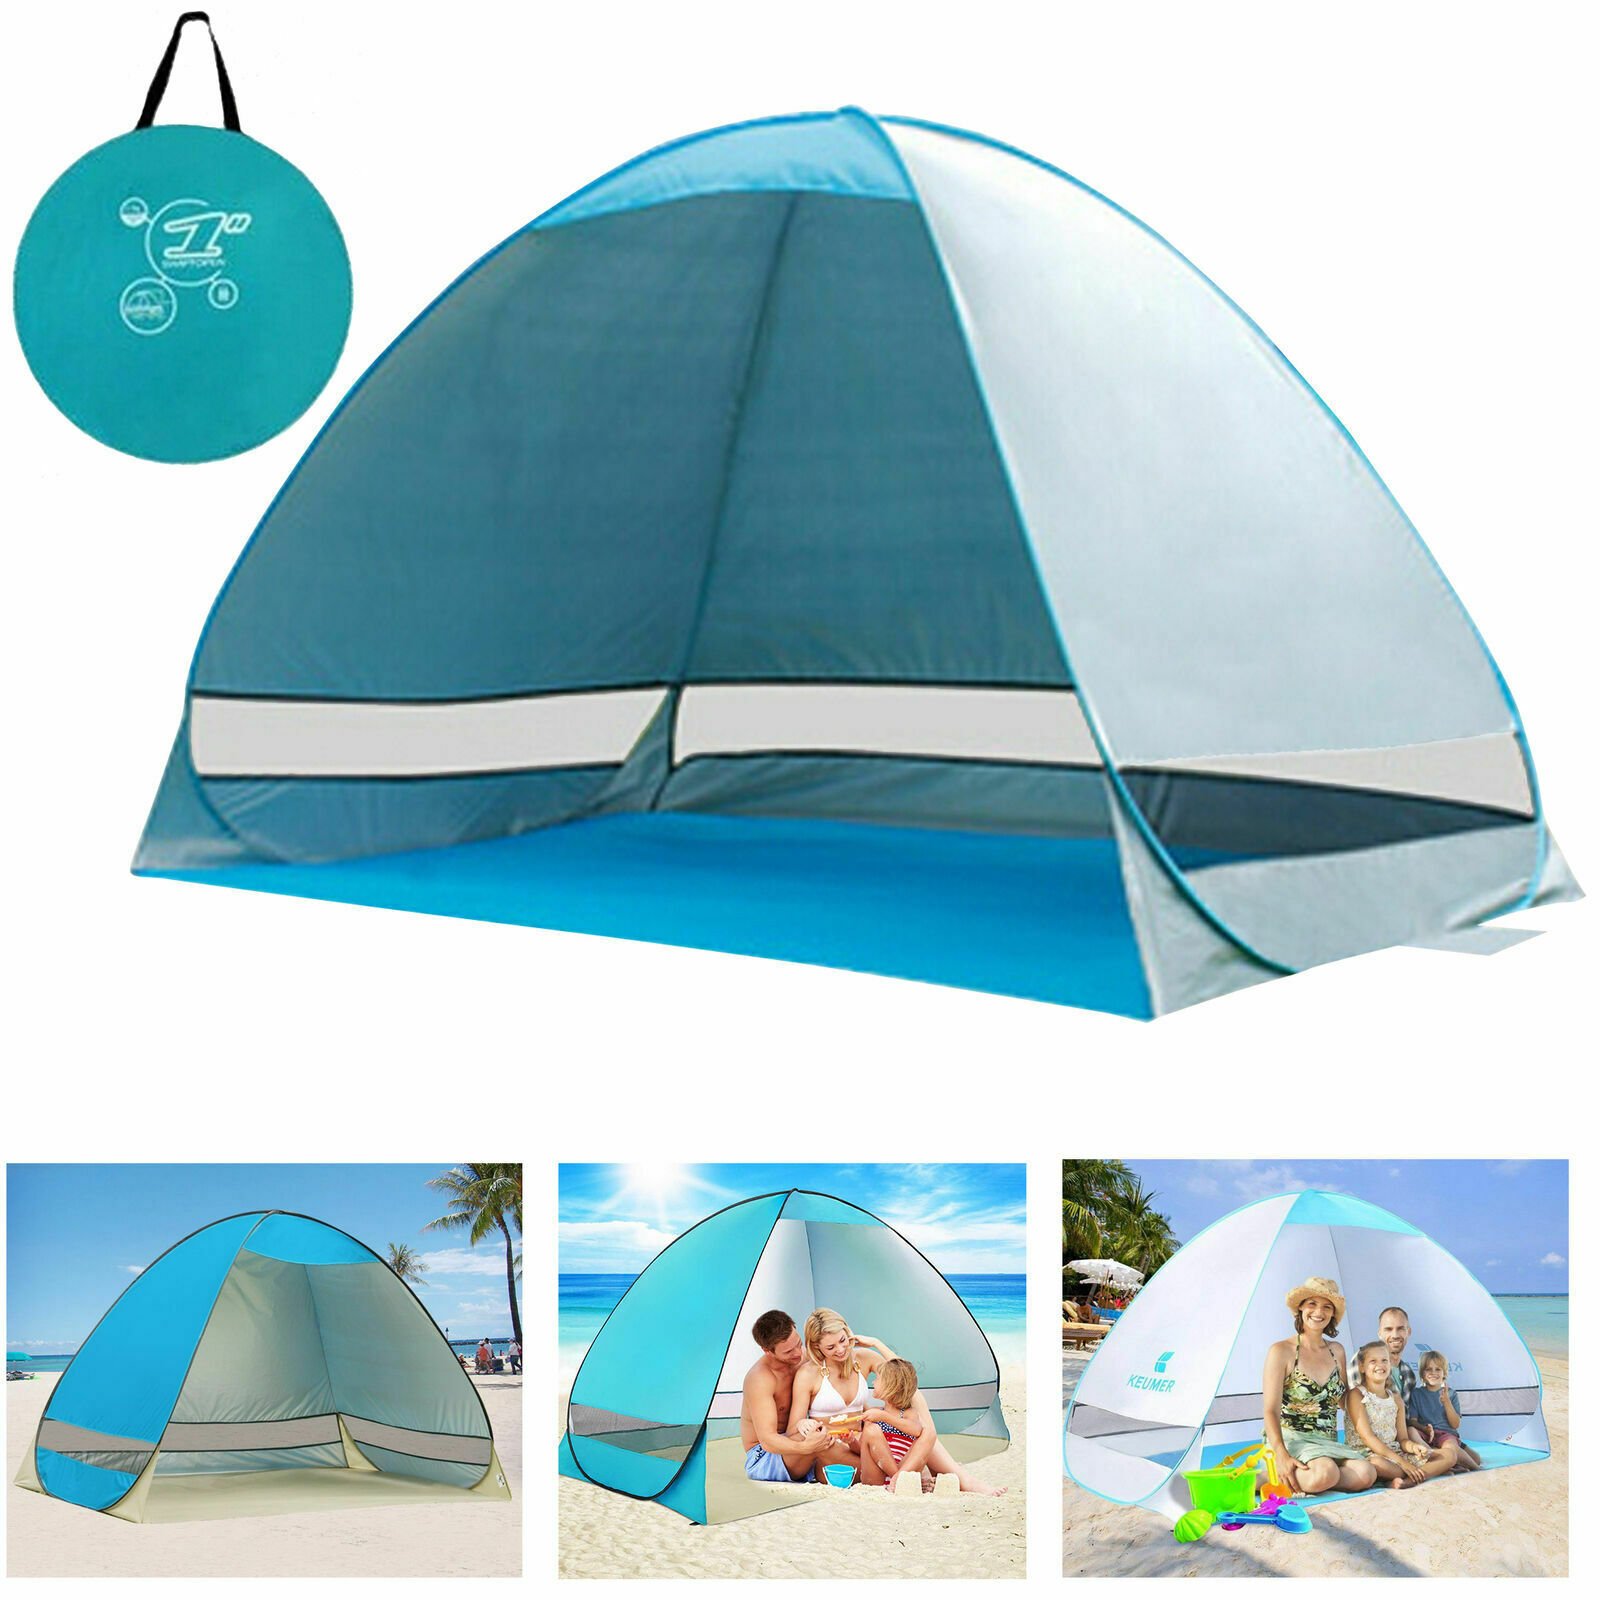 Portable 2 Person Pop Up Beach Tent UV50 Instant Camping Tent Sun Shade Shelter